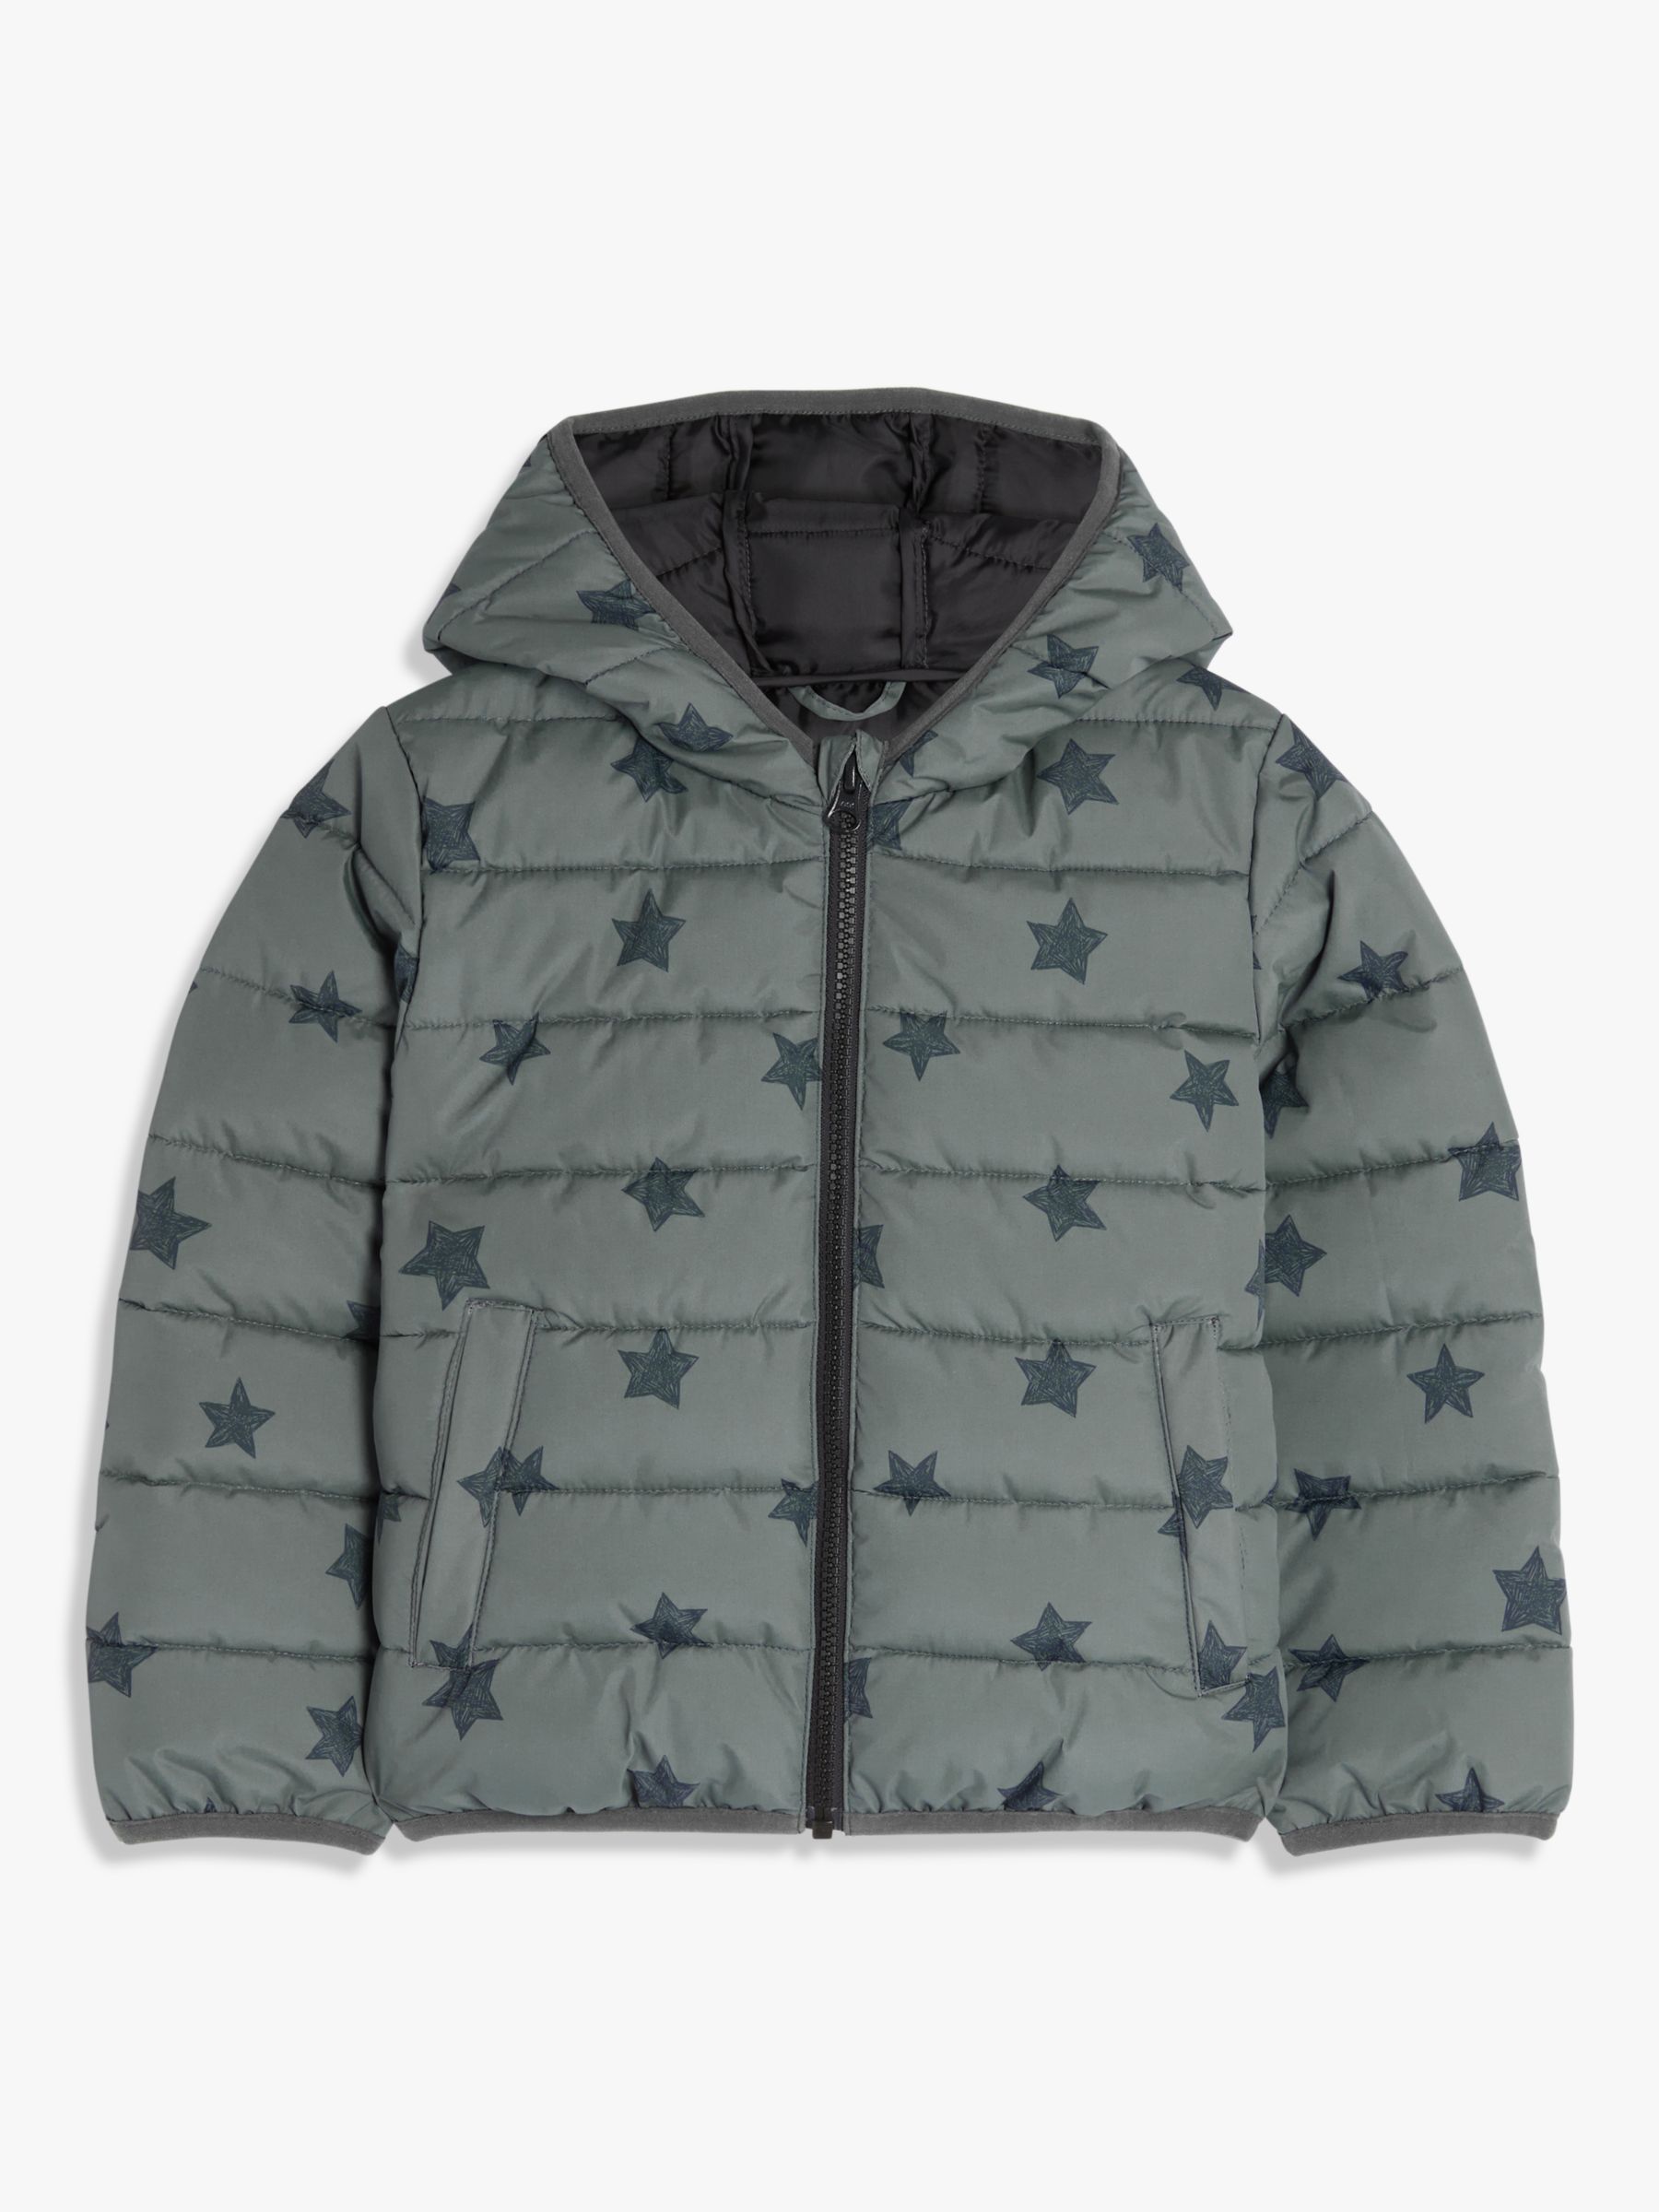 ANYDAY John Lewis & Partners Kids' Star Puffer Jacket, Charcoal